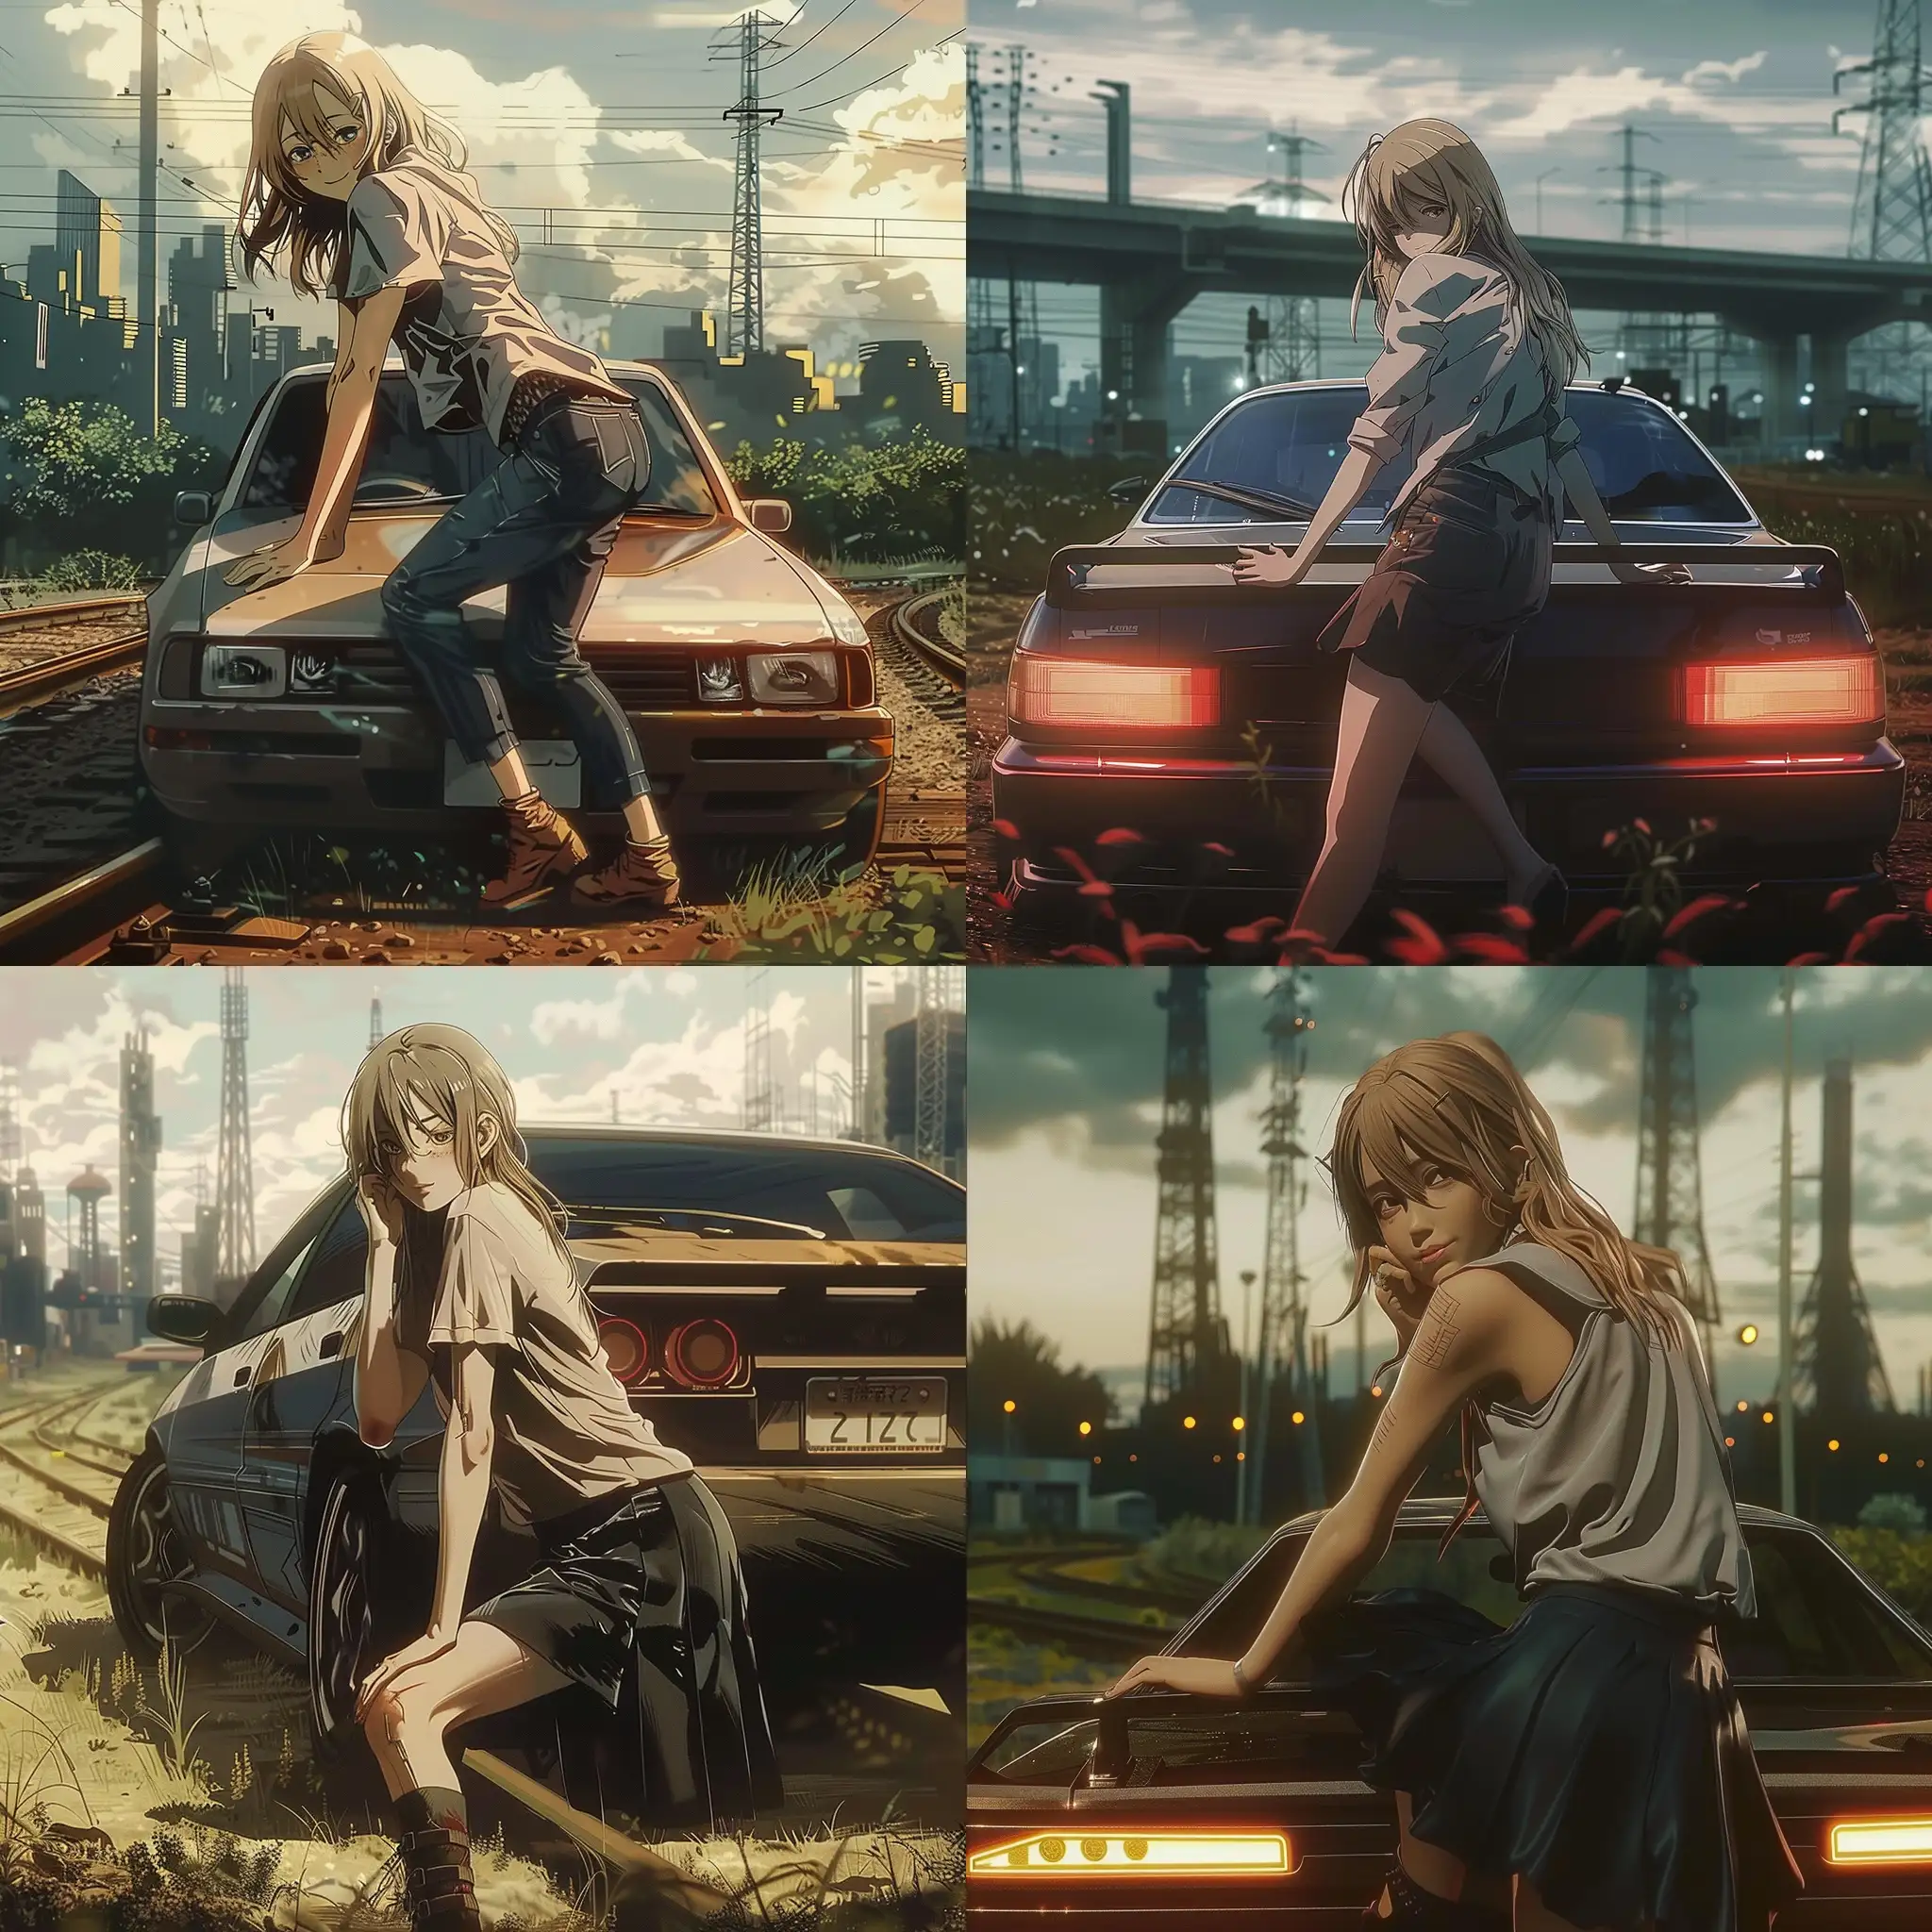 Cyberpunk-Girl-Leaning-on-Car-Outside-the-City